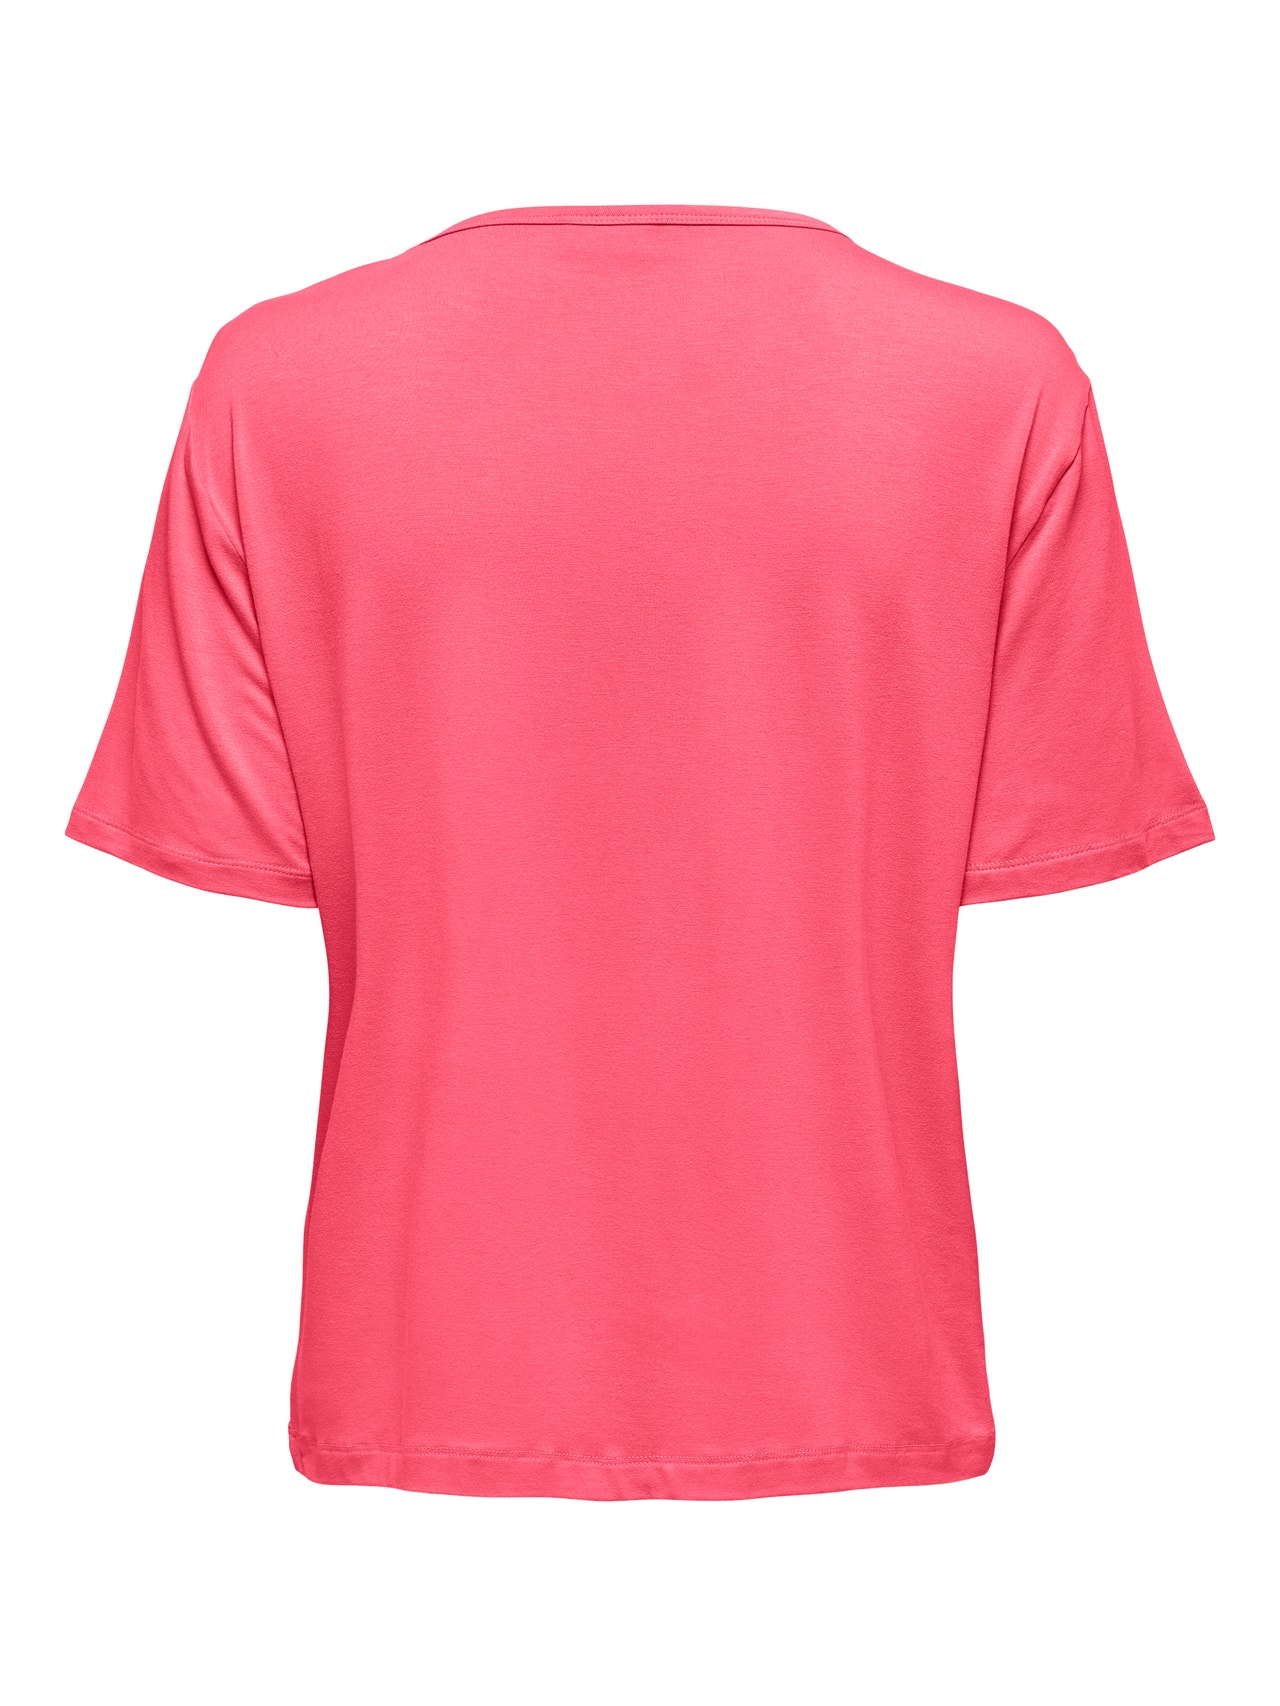 ONLY O-neck top -Coral Paradise - 15330819